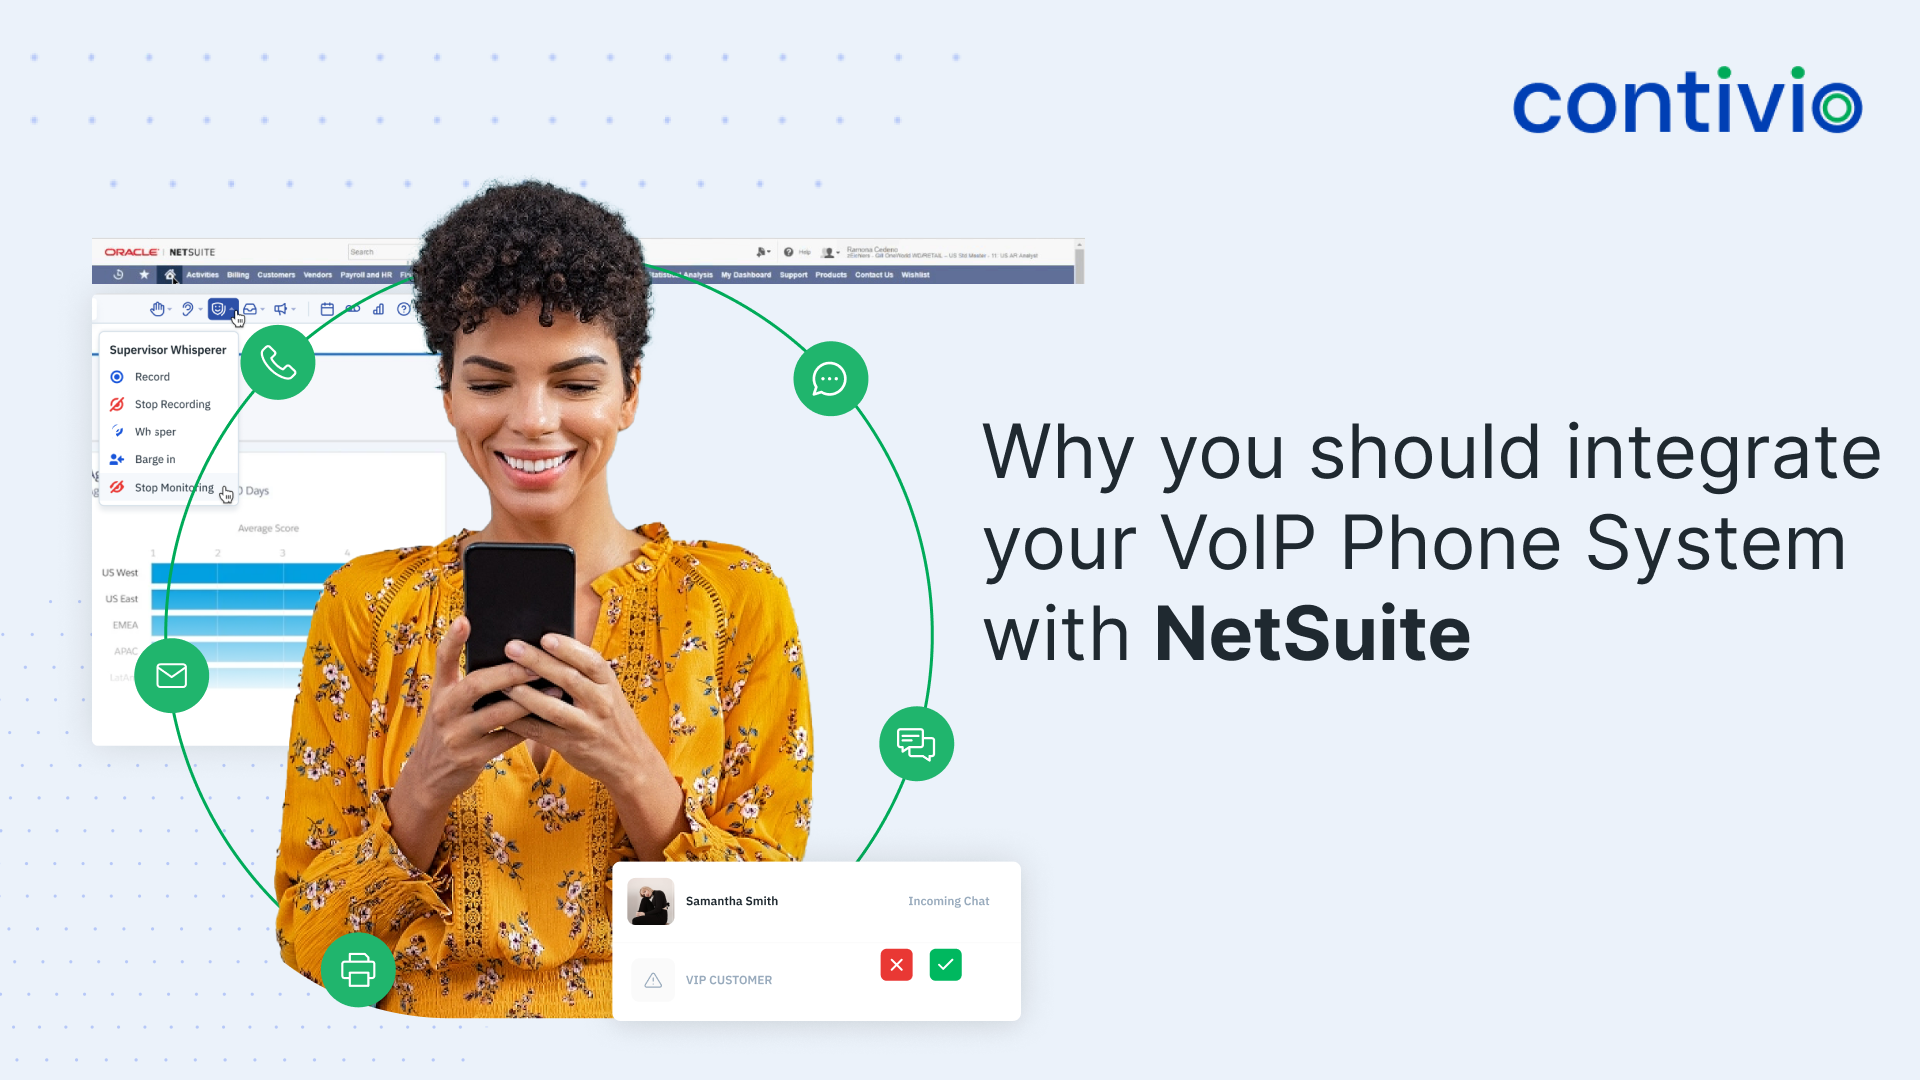 NetSuite VoIP Integration with Contivio